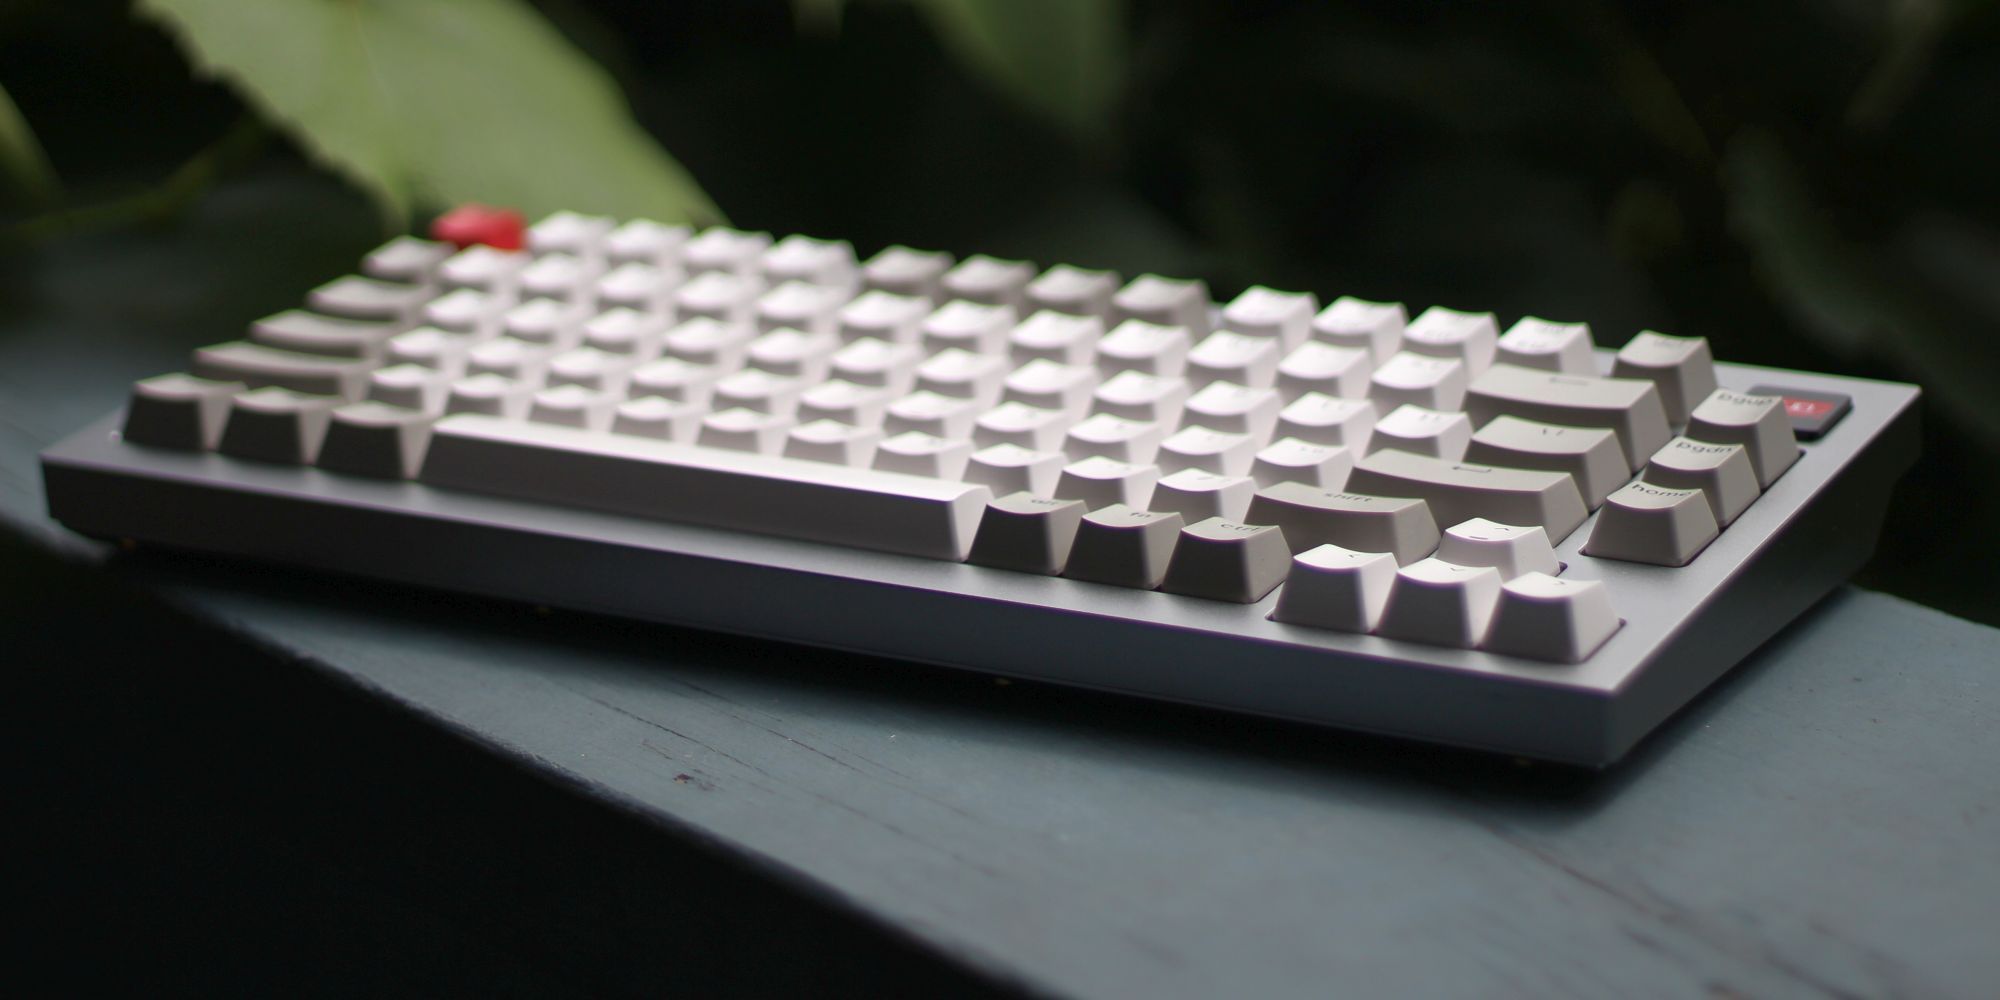 keychron-q1-mechanical-keyboard-review-outside-front